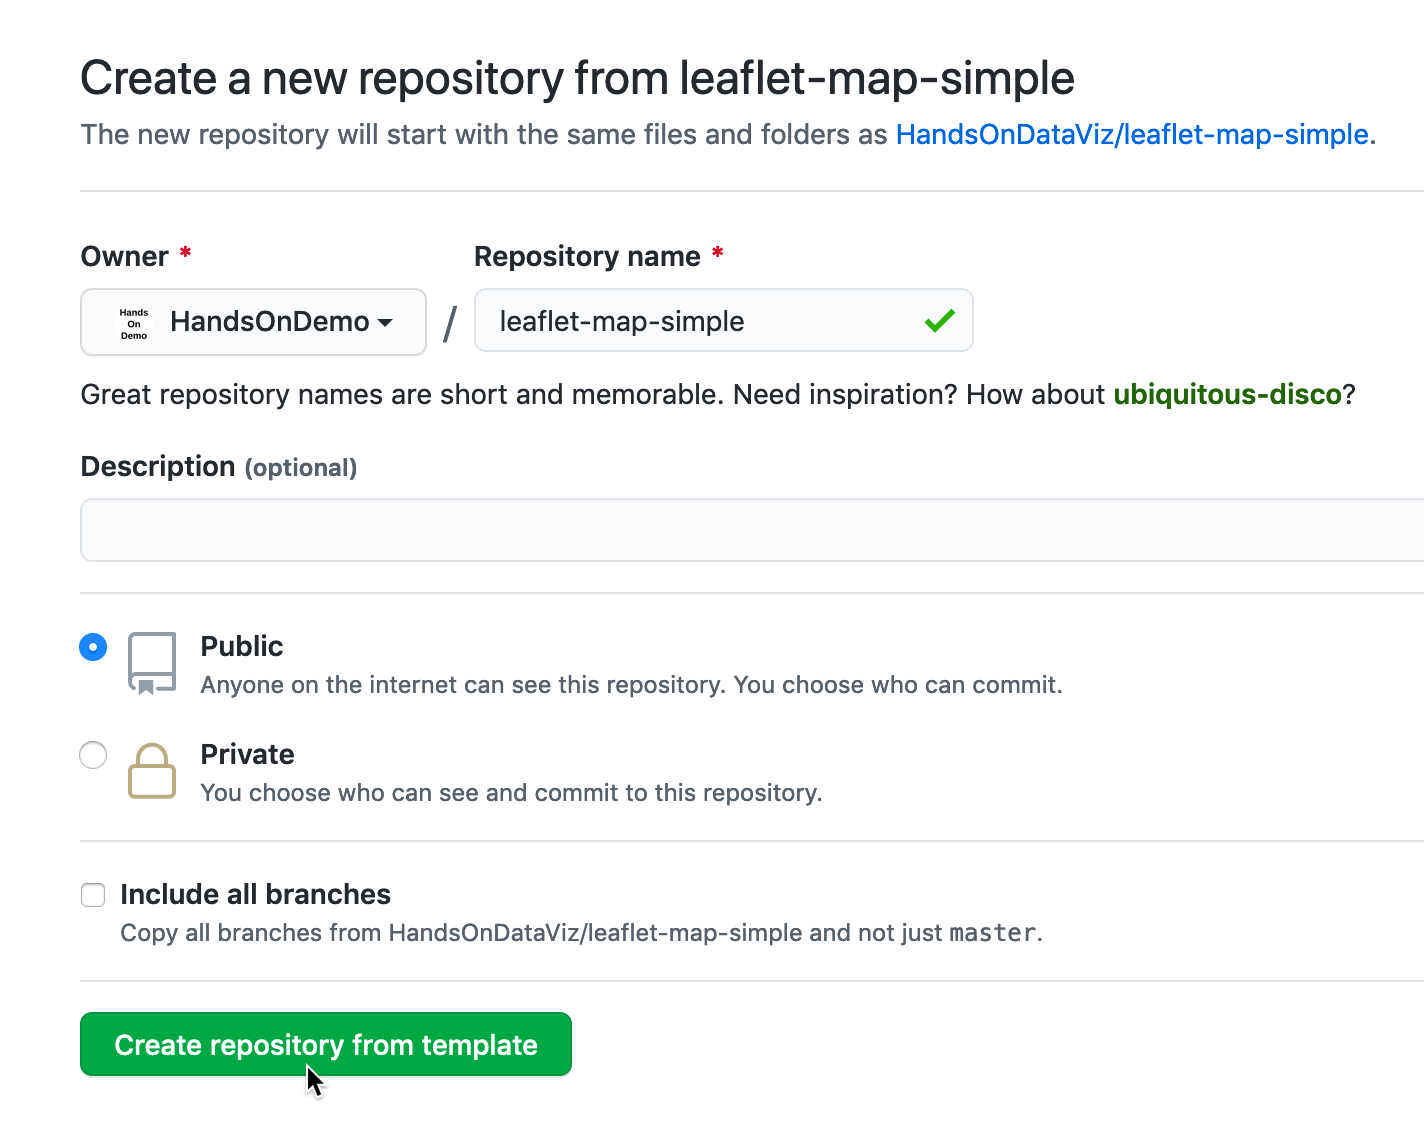 Name your copied repo leaflet-map-simple.